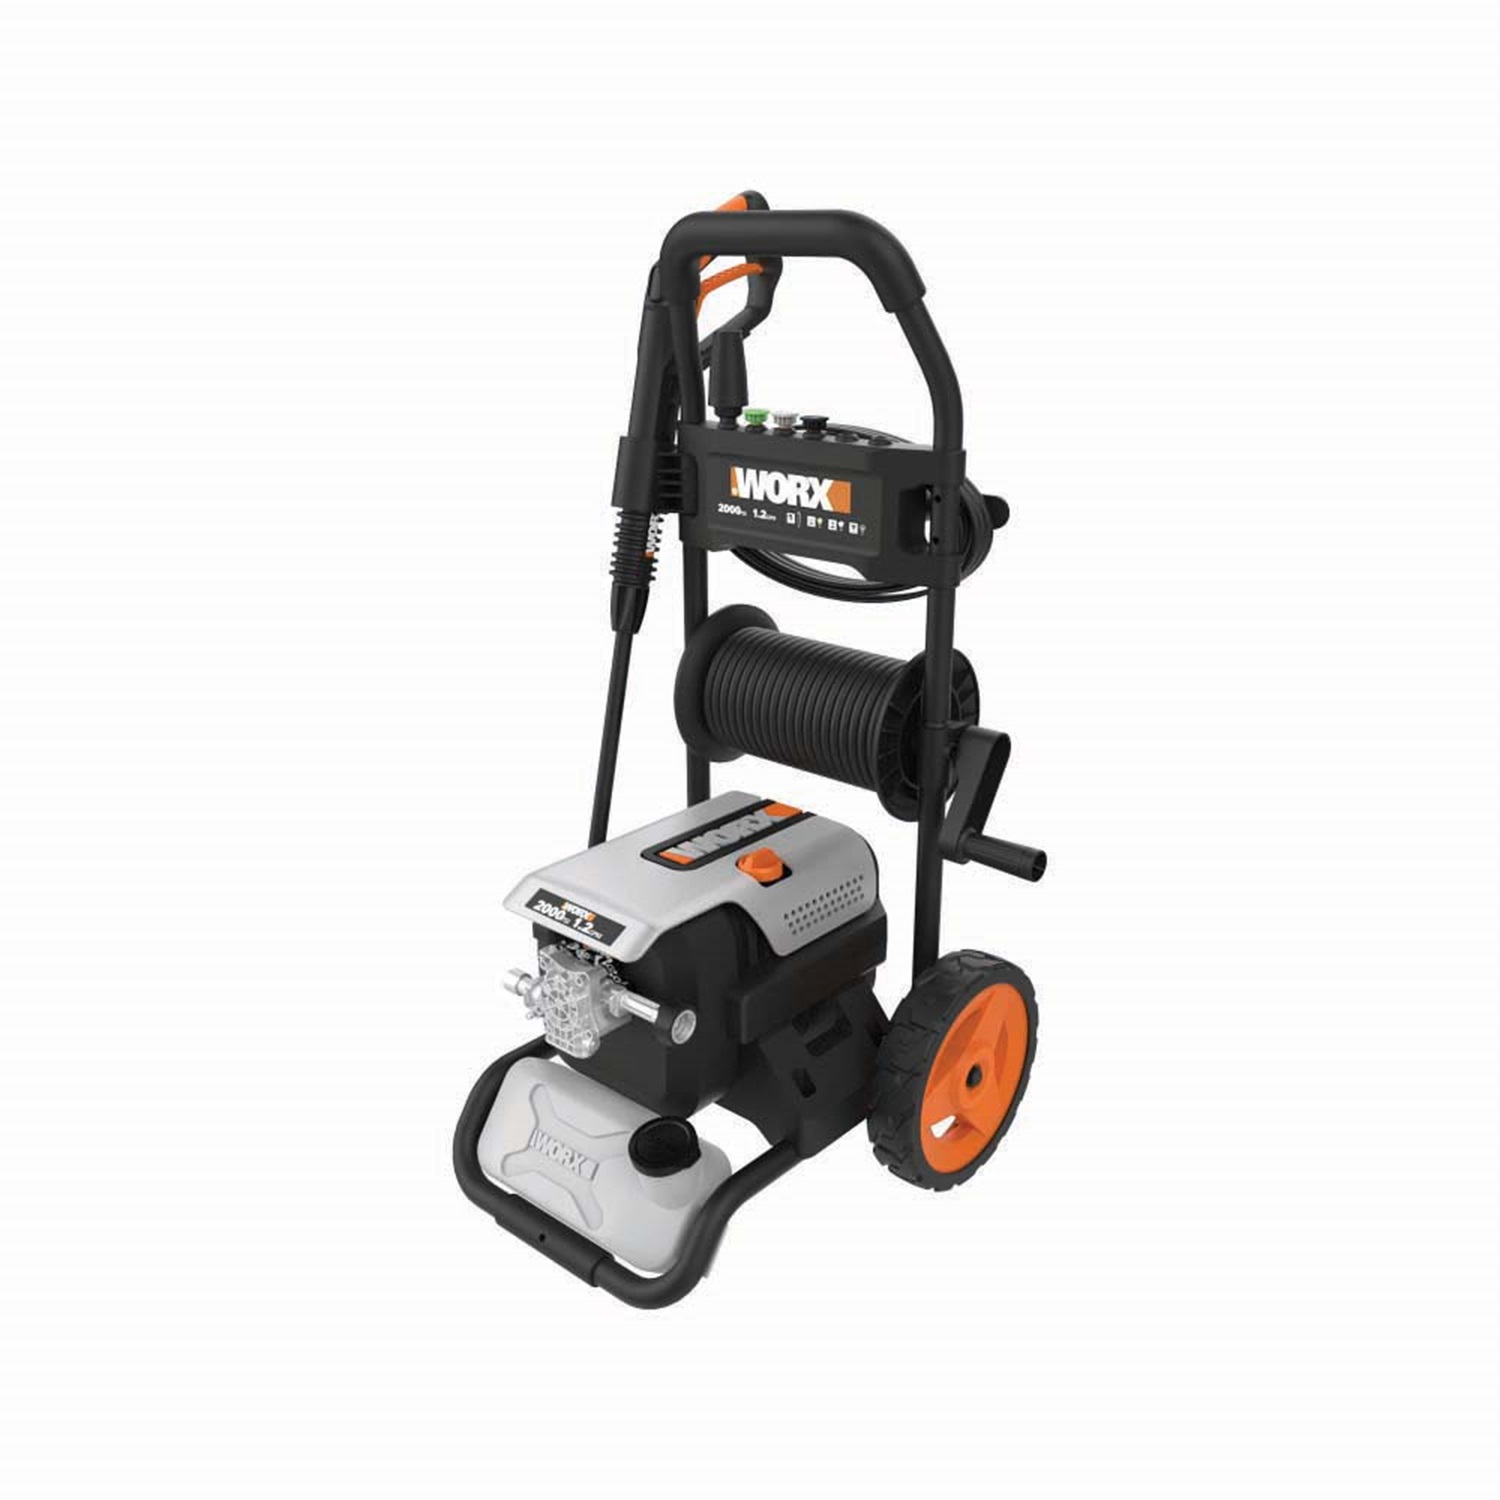 WORX - Electric Pressure Washer up to 2000 PSI - Black